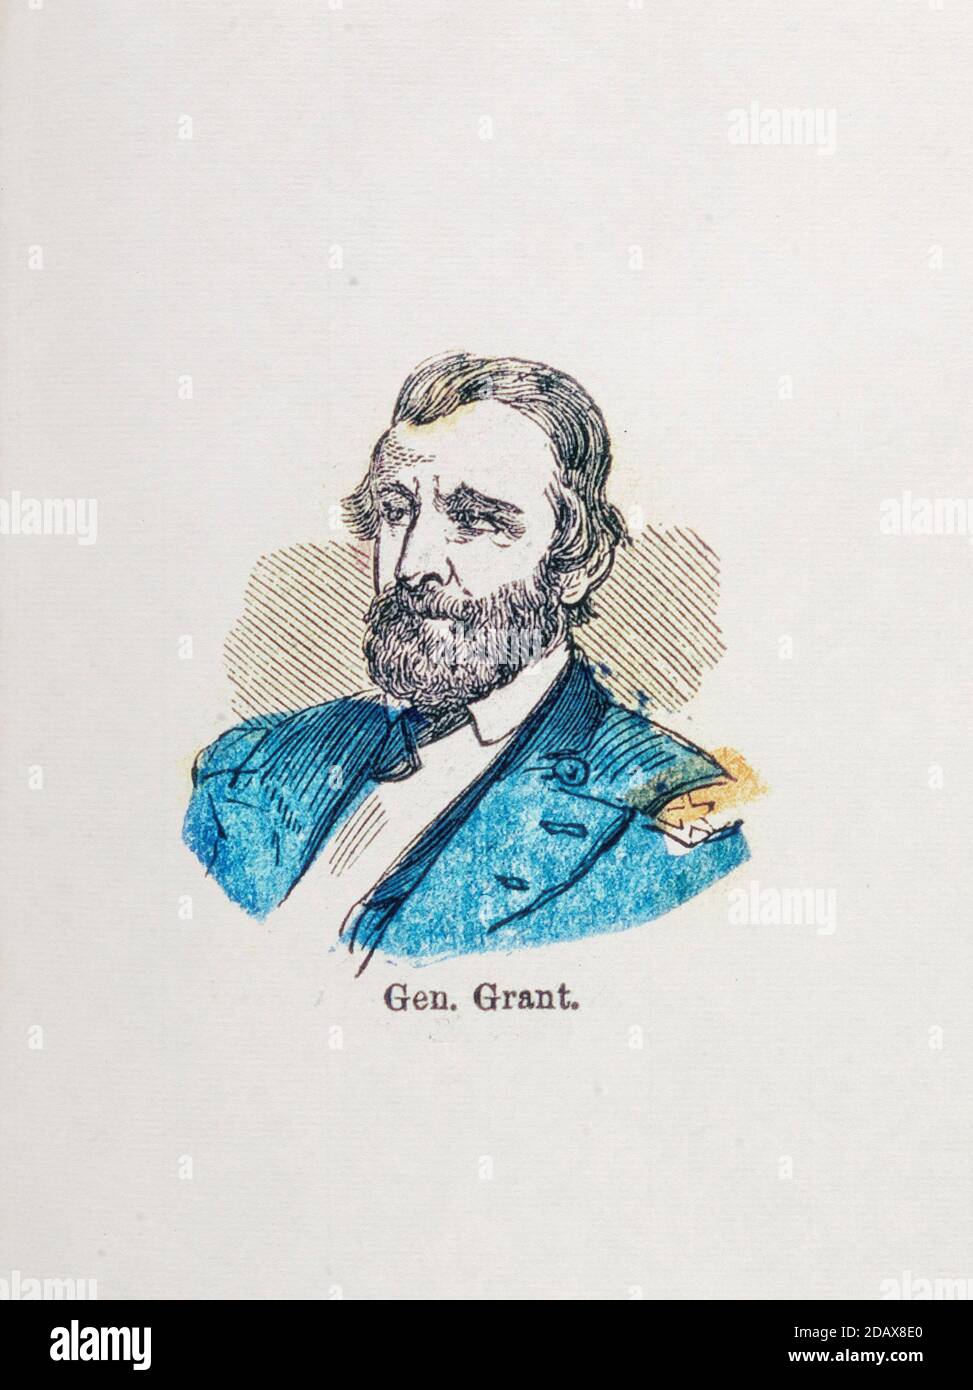 Engraving of Ulysses S. Grant. Ulysses S. Grant (1822 – 1885) was an American soldier and politician who served as the 18th president of the United St Stock Photo